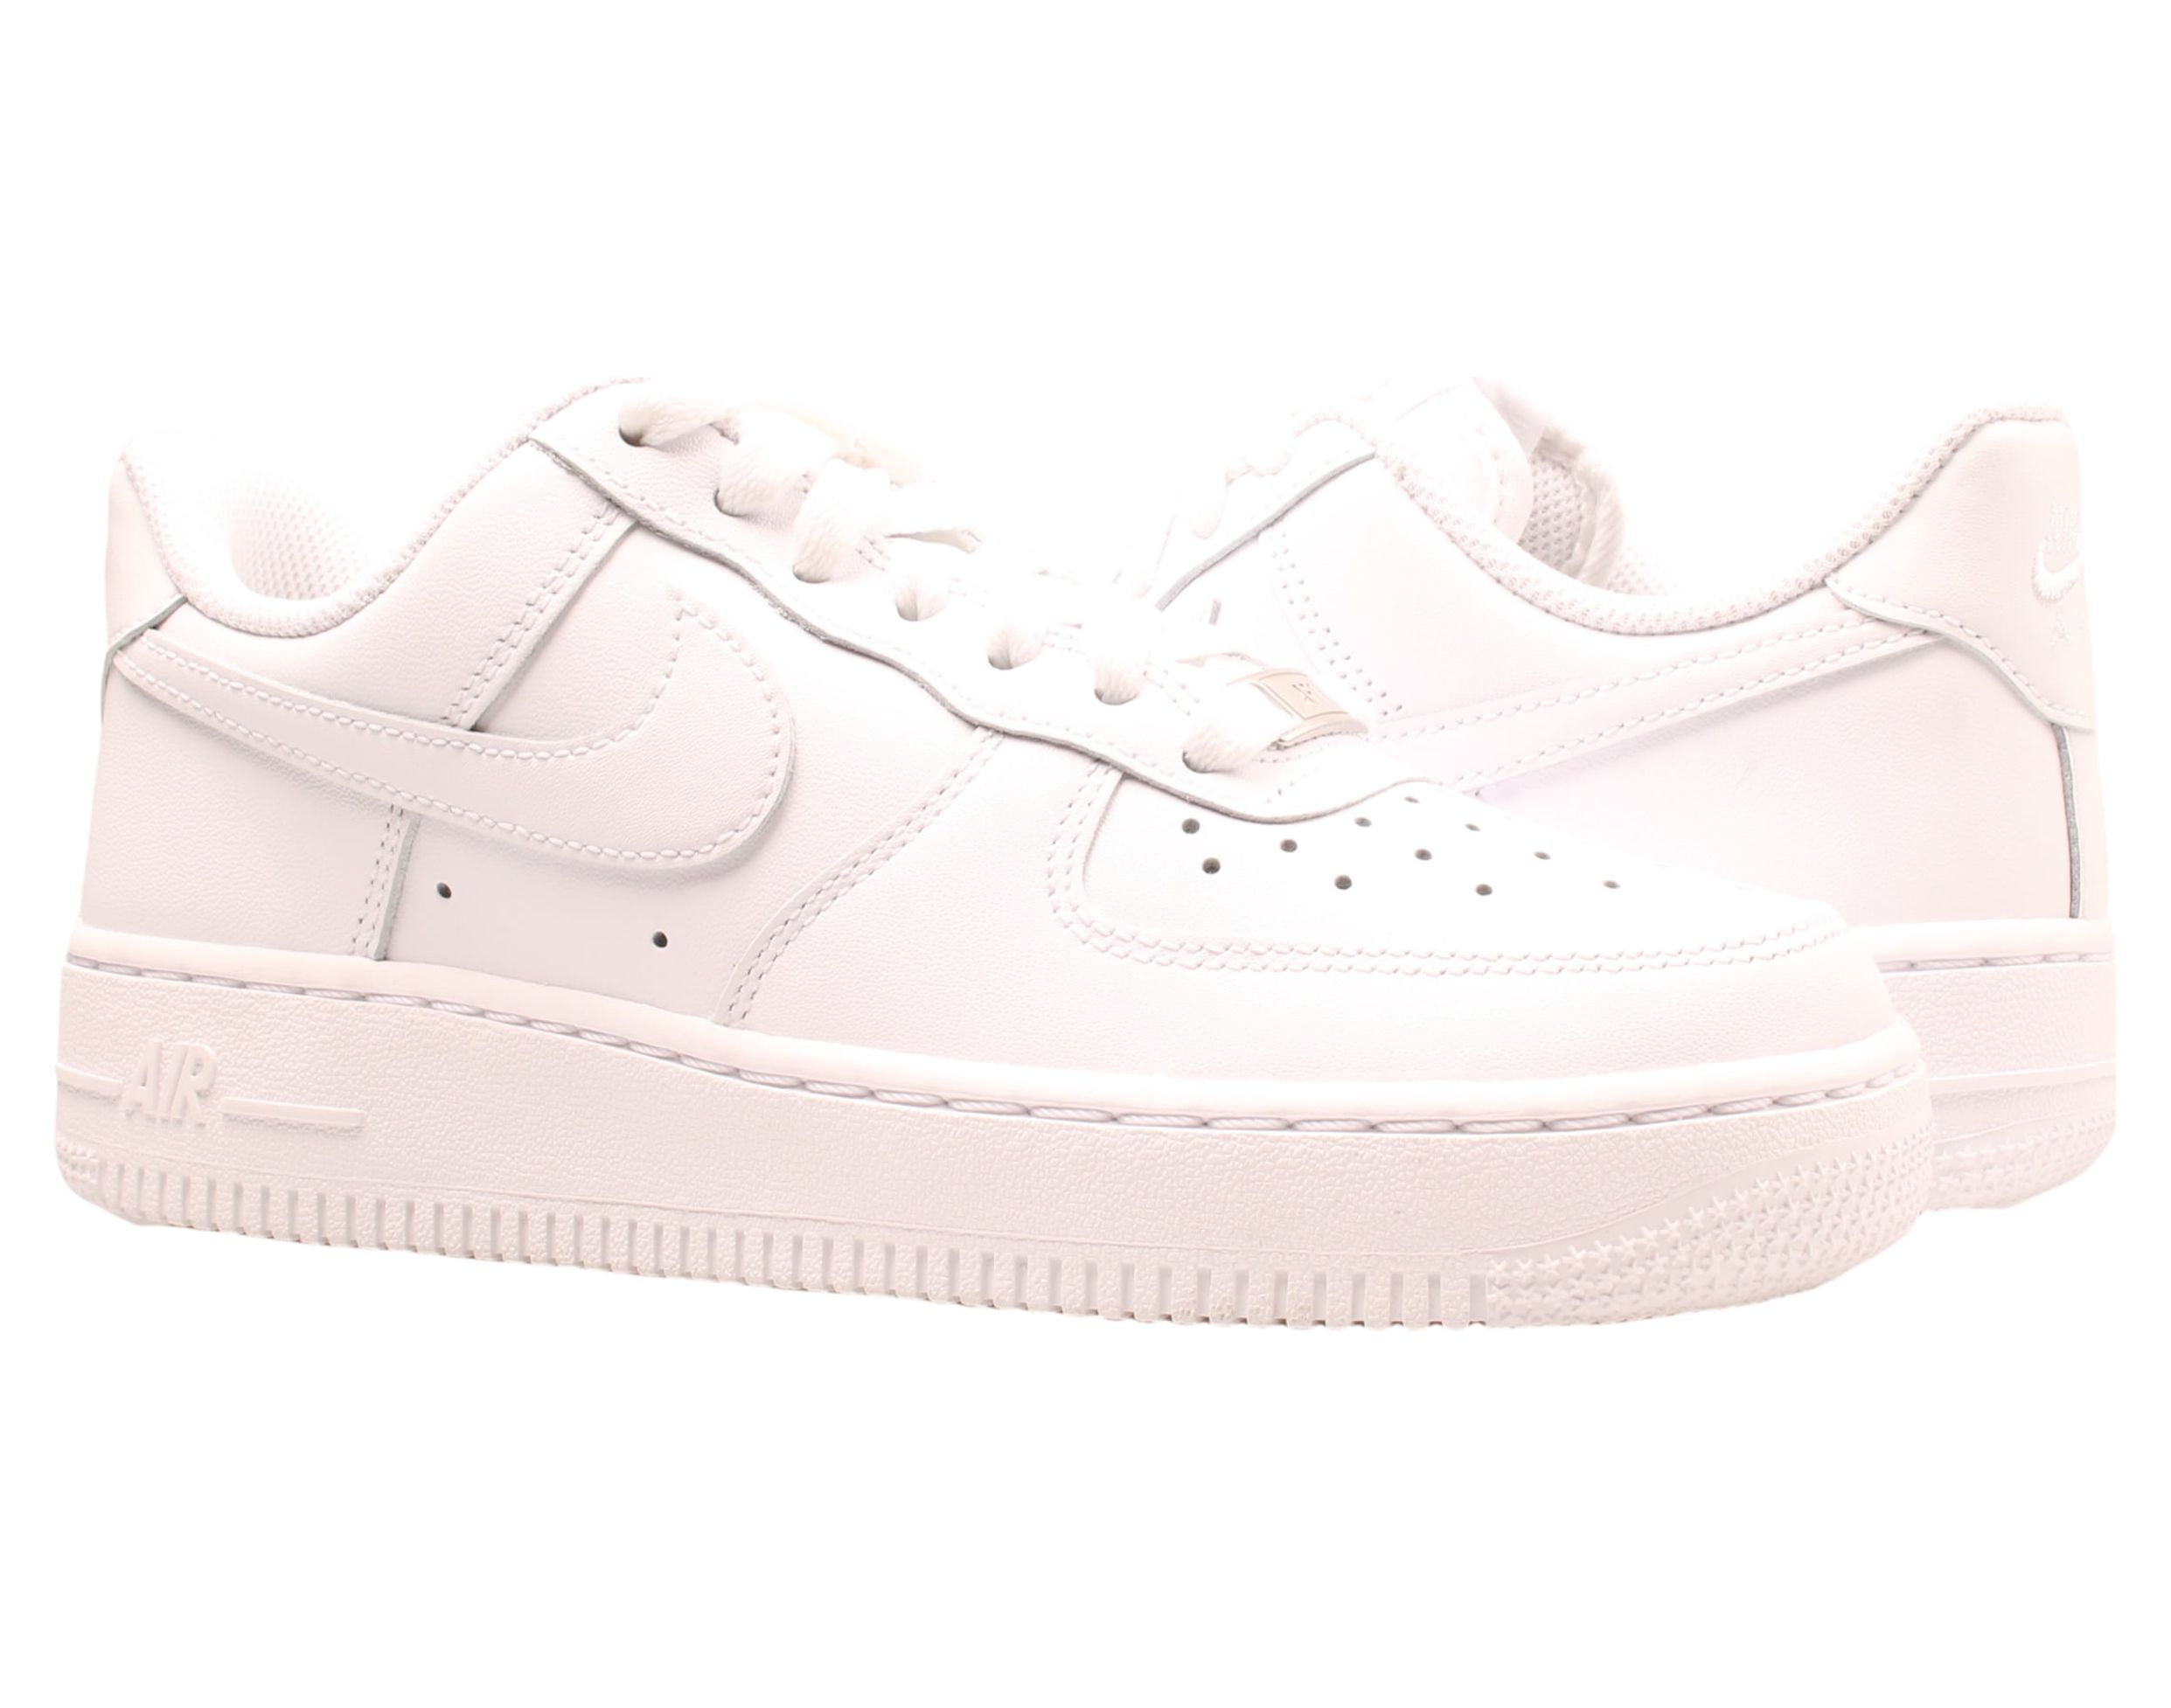 Womens White Air Force 1 Shoes.